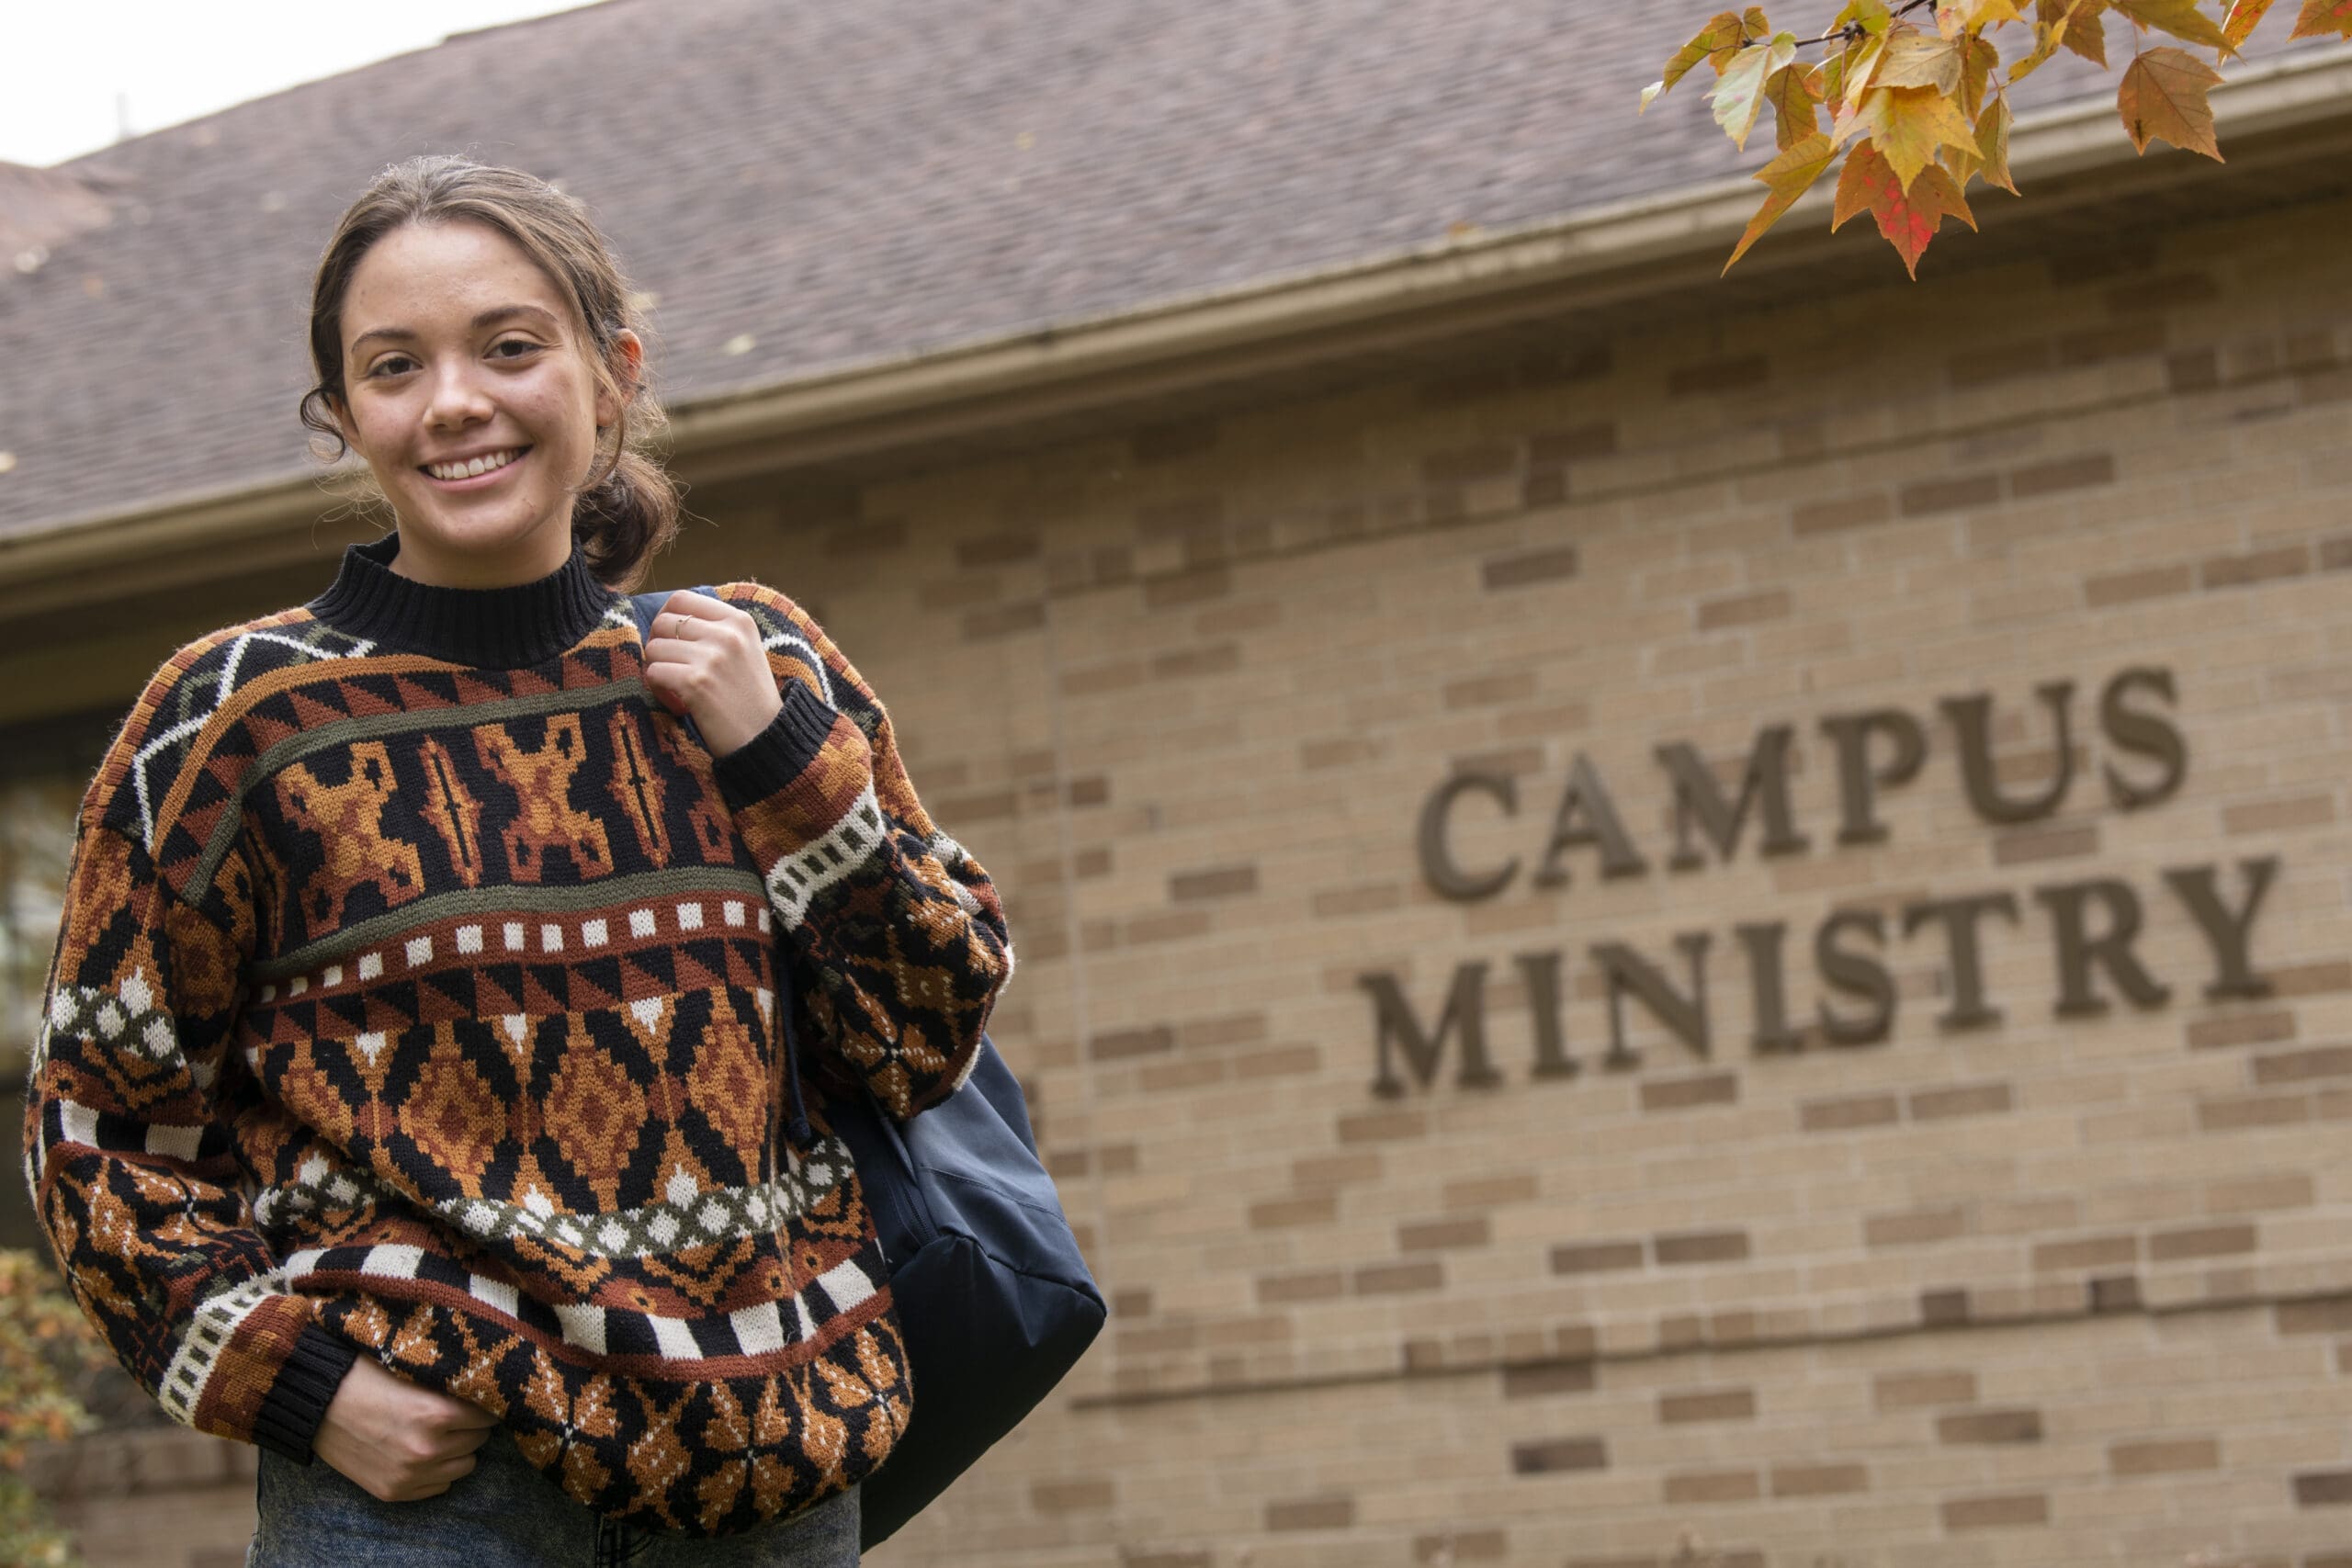 Smiling student in front of campus ministry building